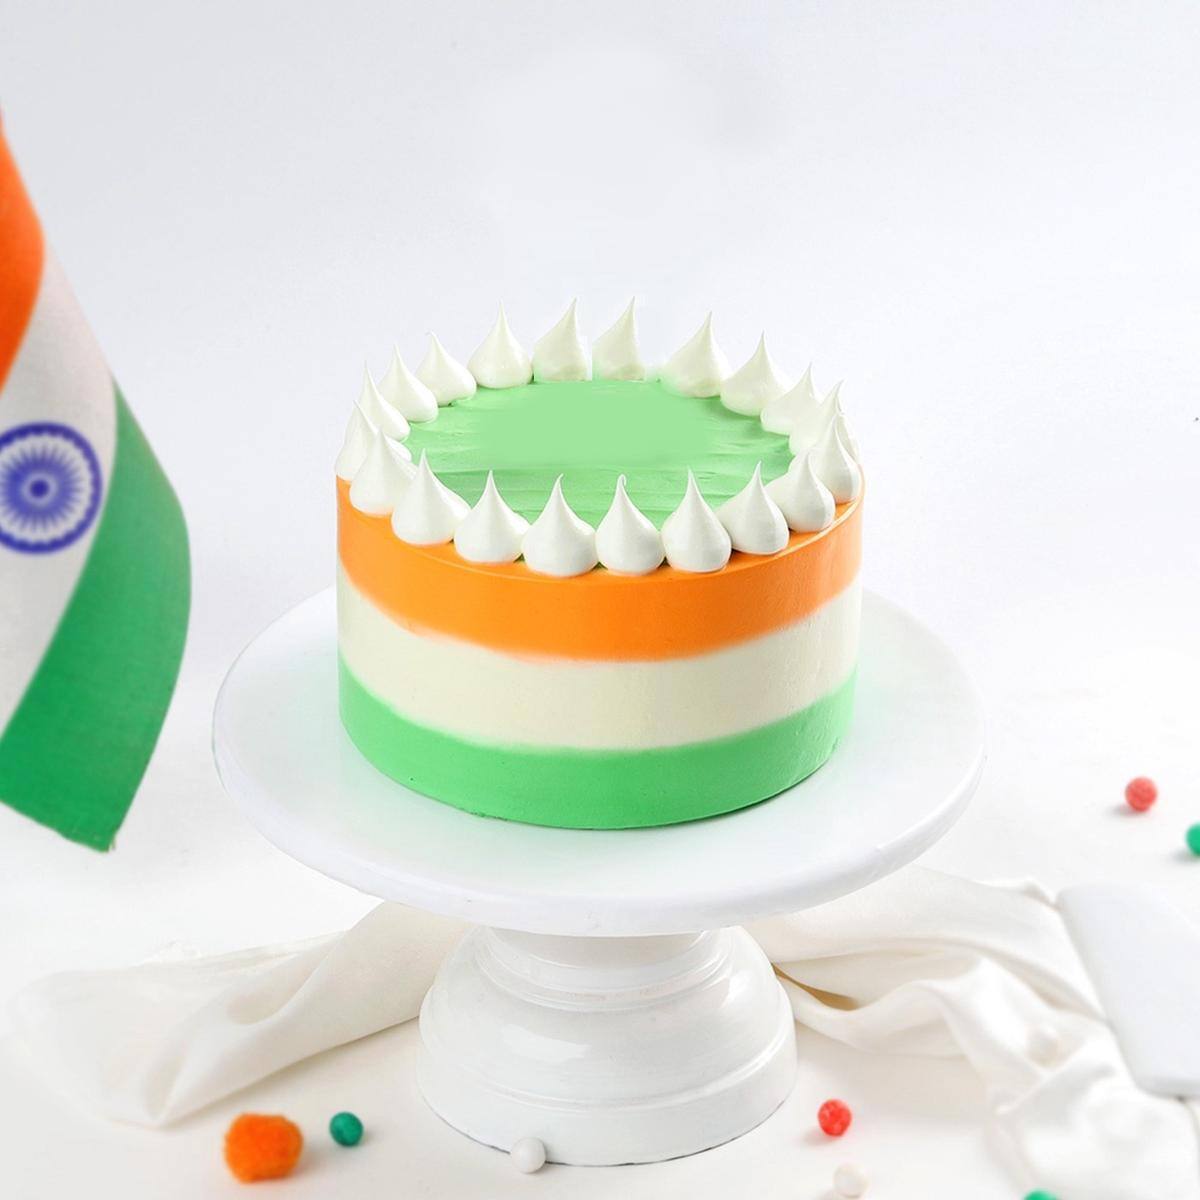 This Republic day, get innovative with your regular cheesecake & try  tricolour cake with melt-in-mouth Go Cheese. Wish you a Happy Republic Day...  | By Go CheeseFacebook